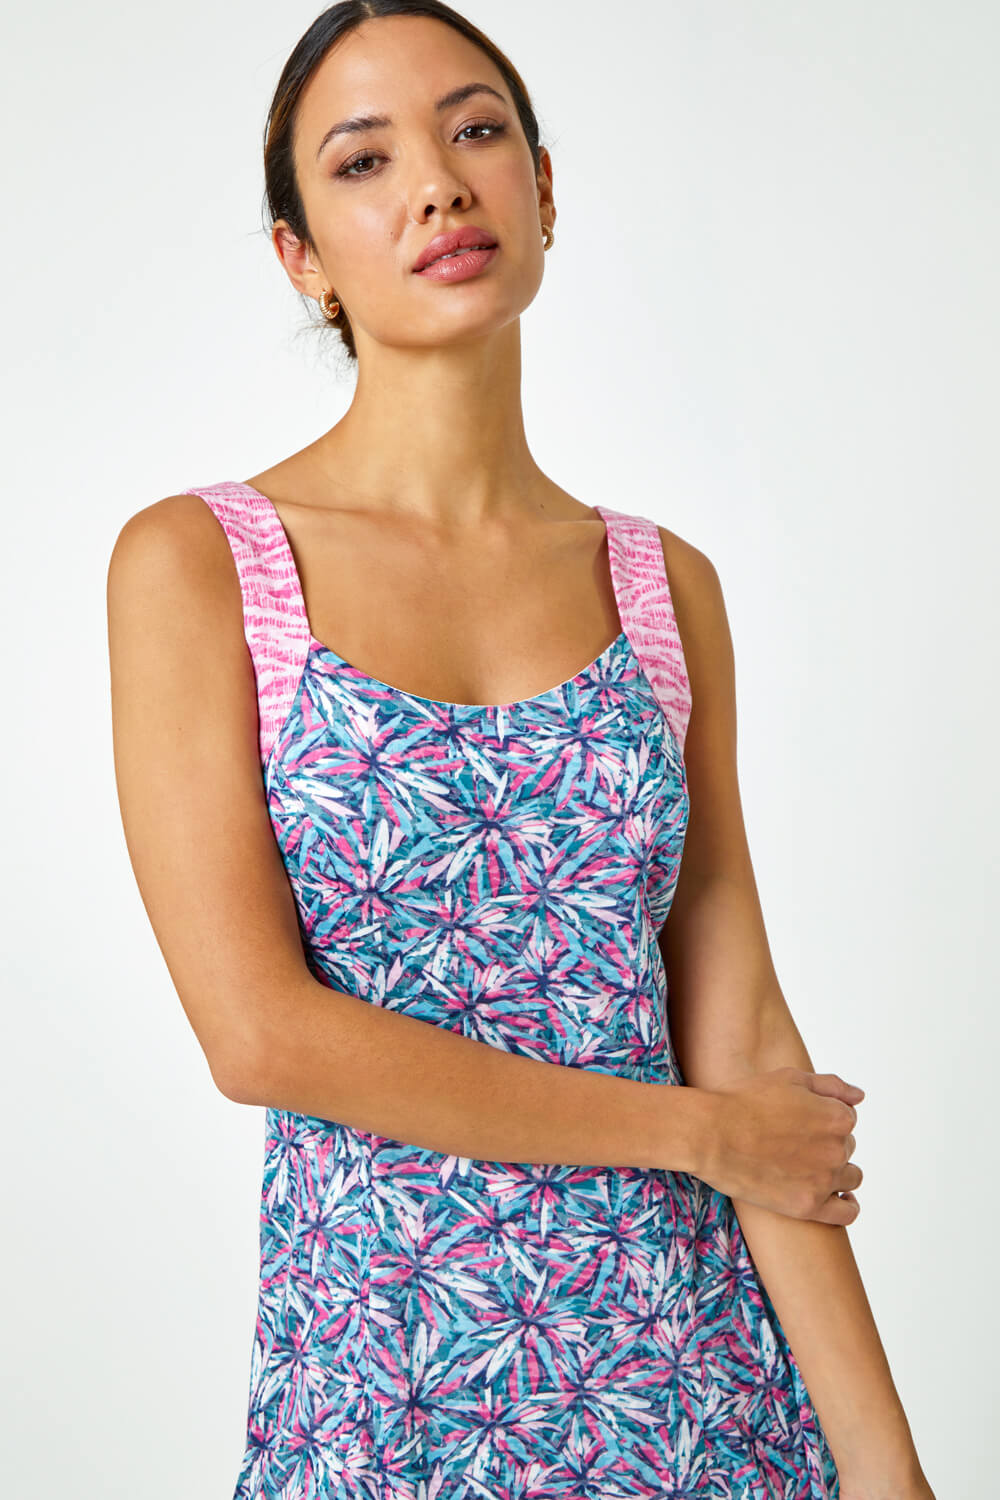 PINK Sleeveless Contrast Floral Print Dress, Image 4 of 5